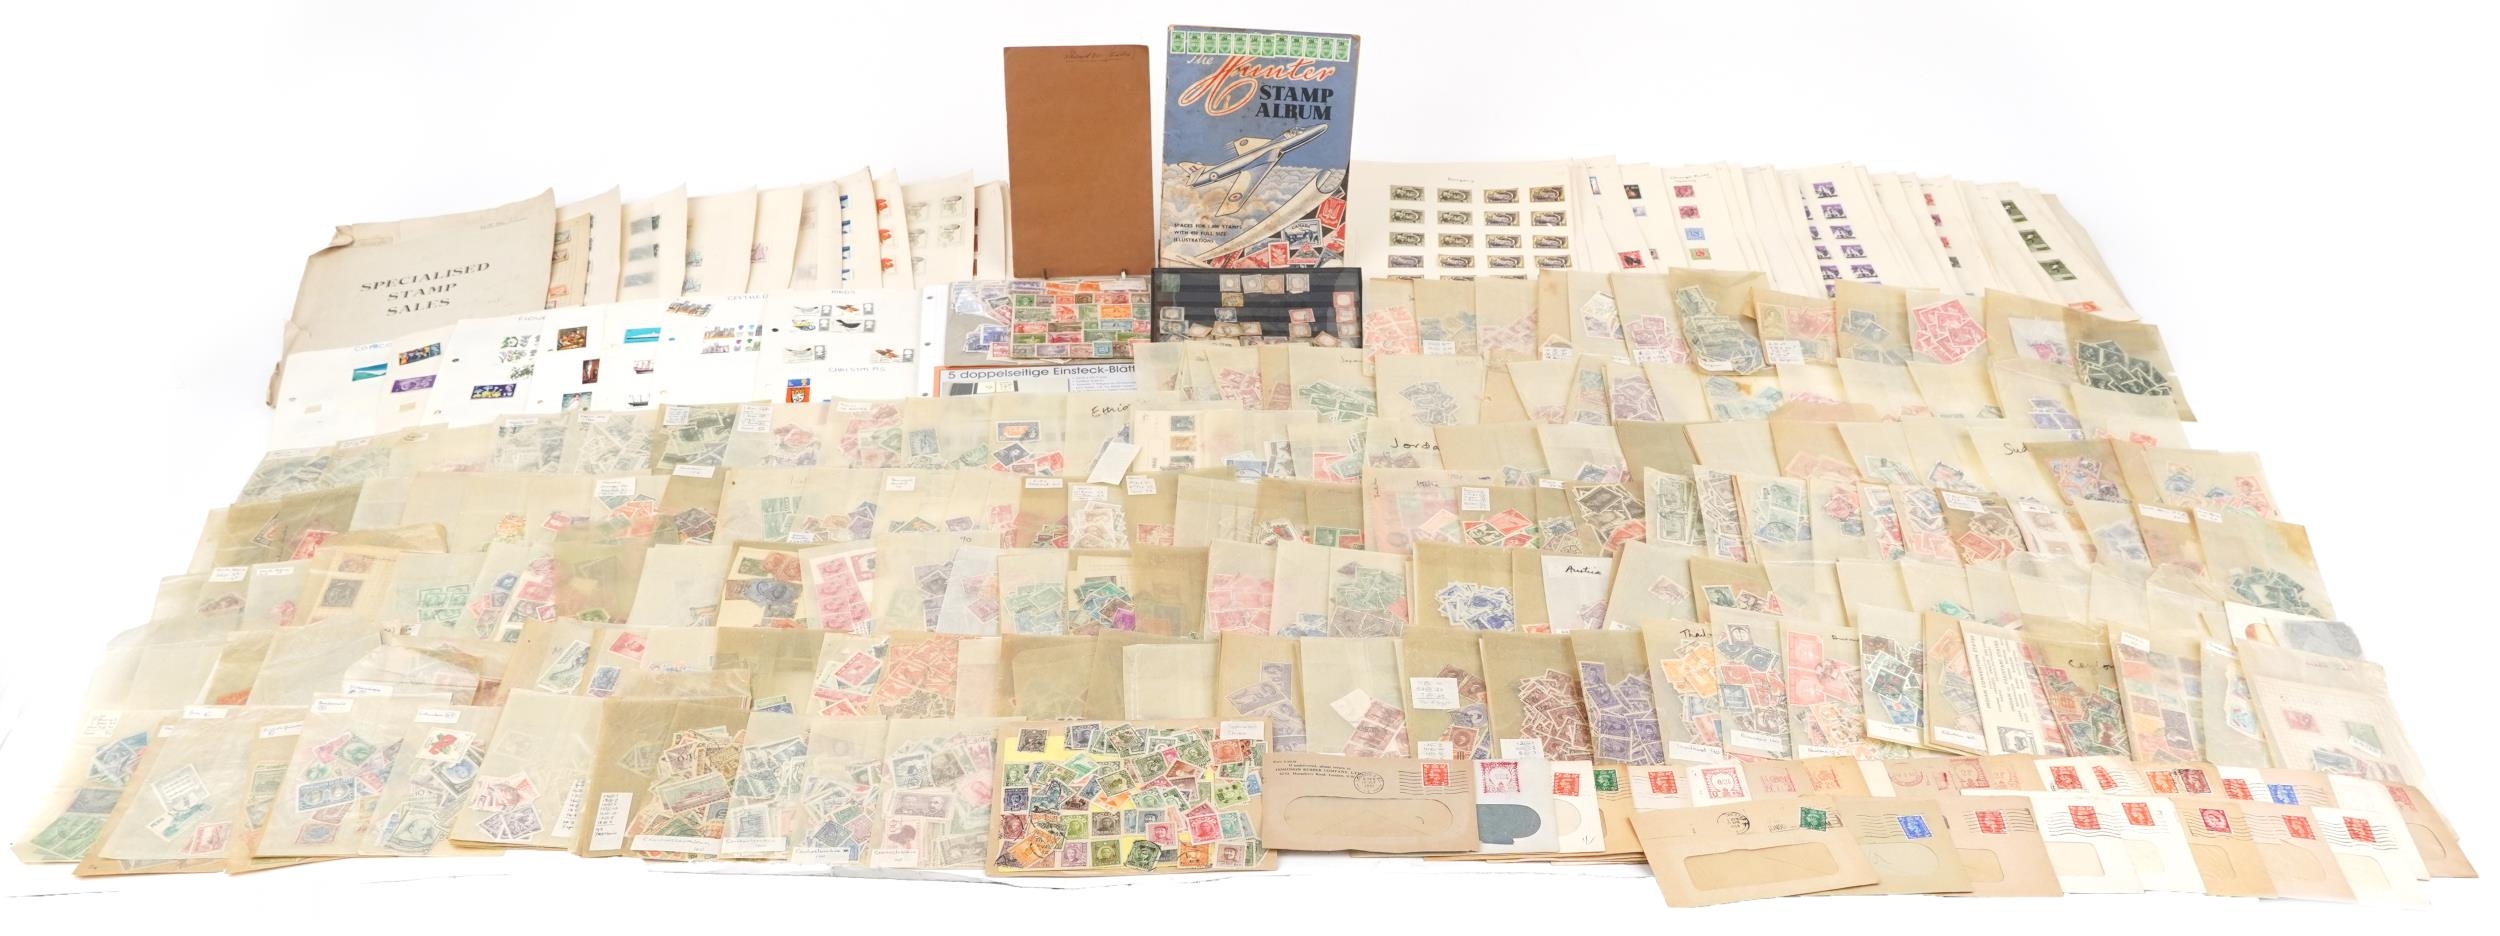 Extensive collection of British and world stamps, predominantly arranged on sheets, including China